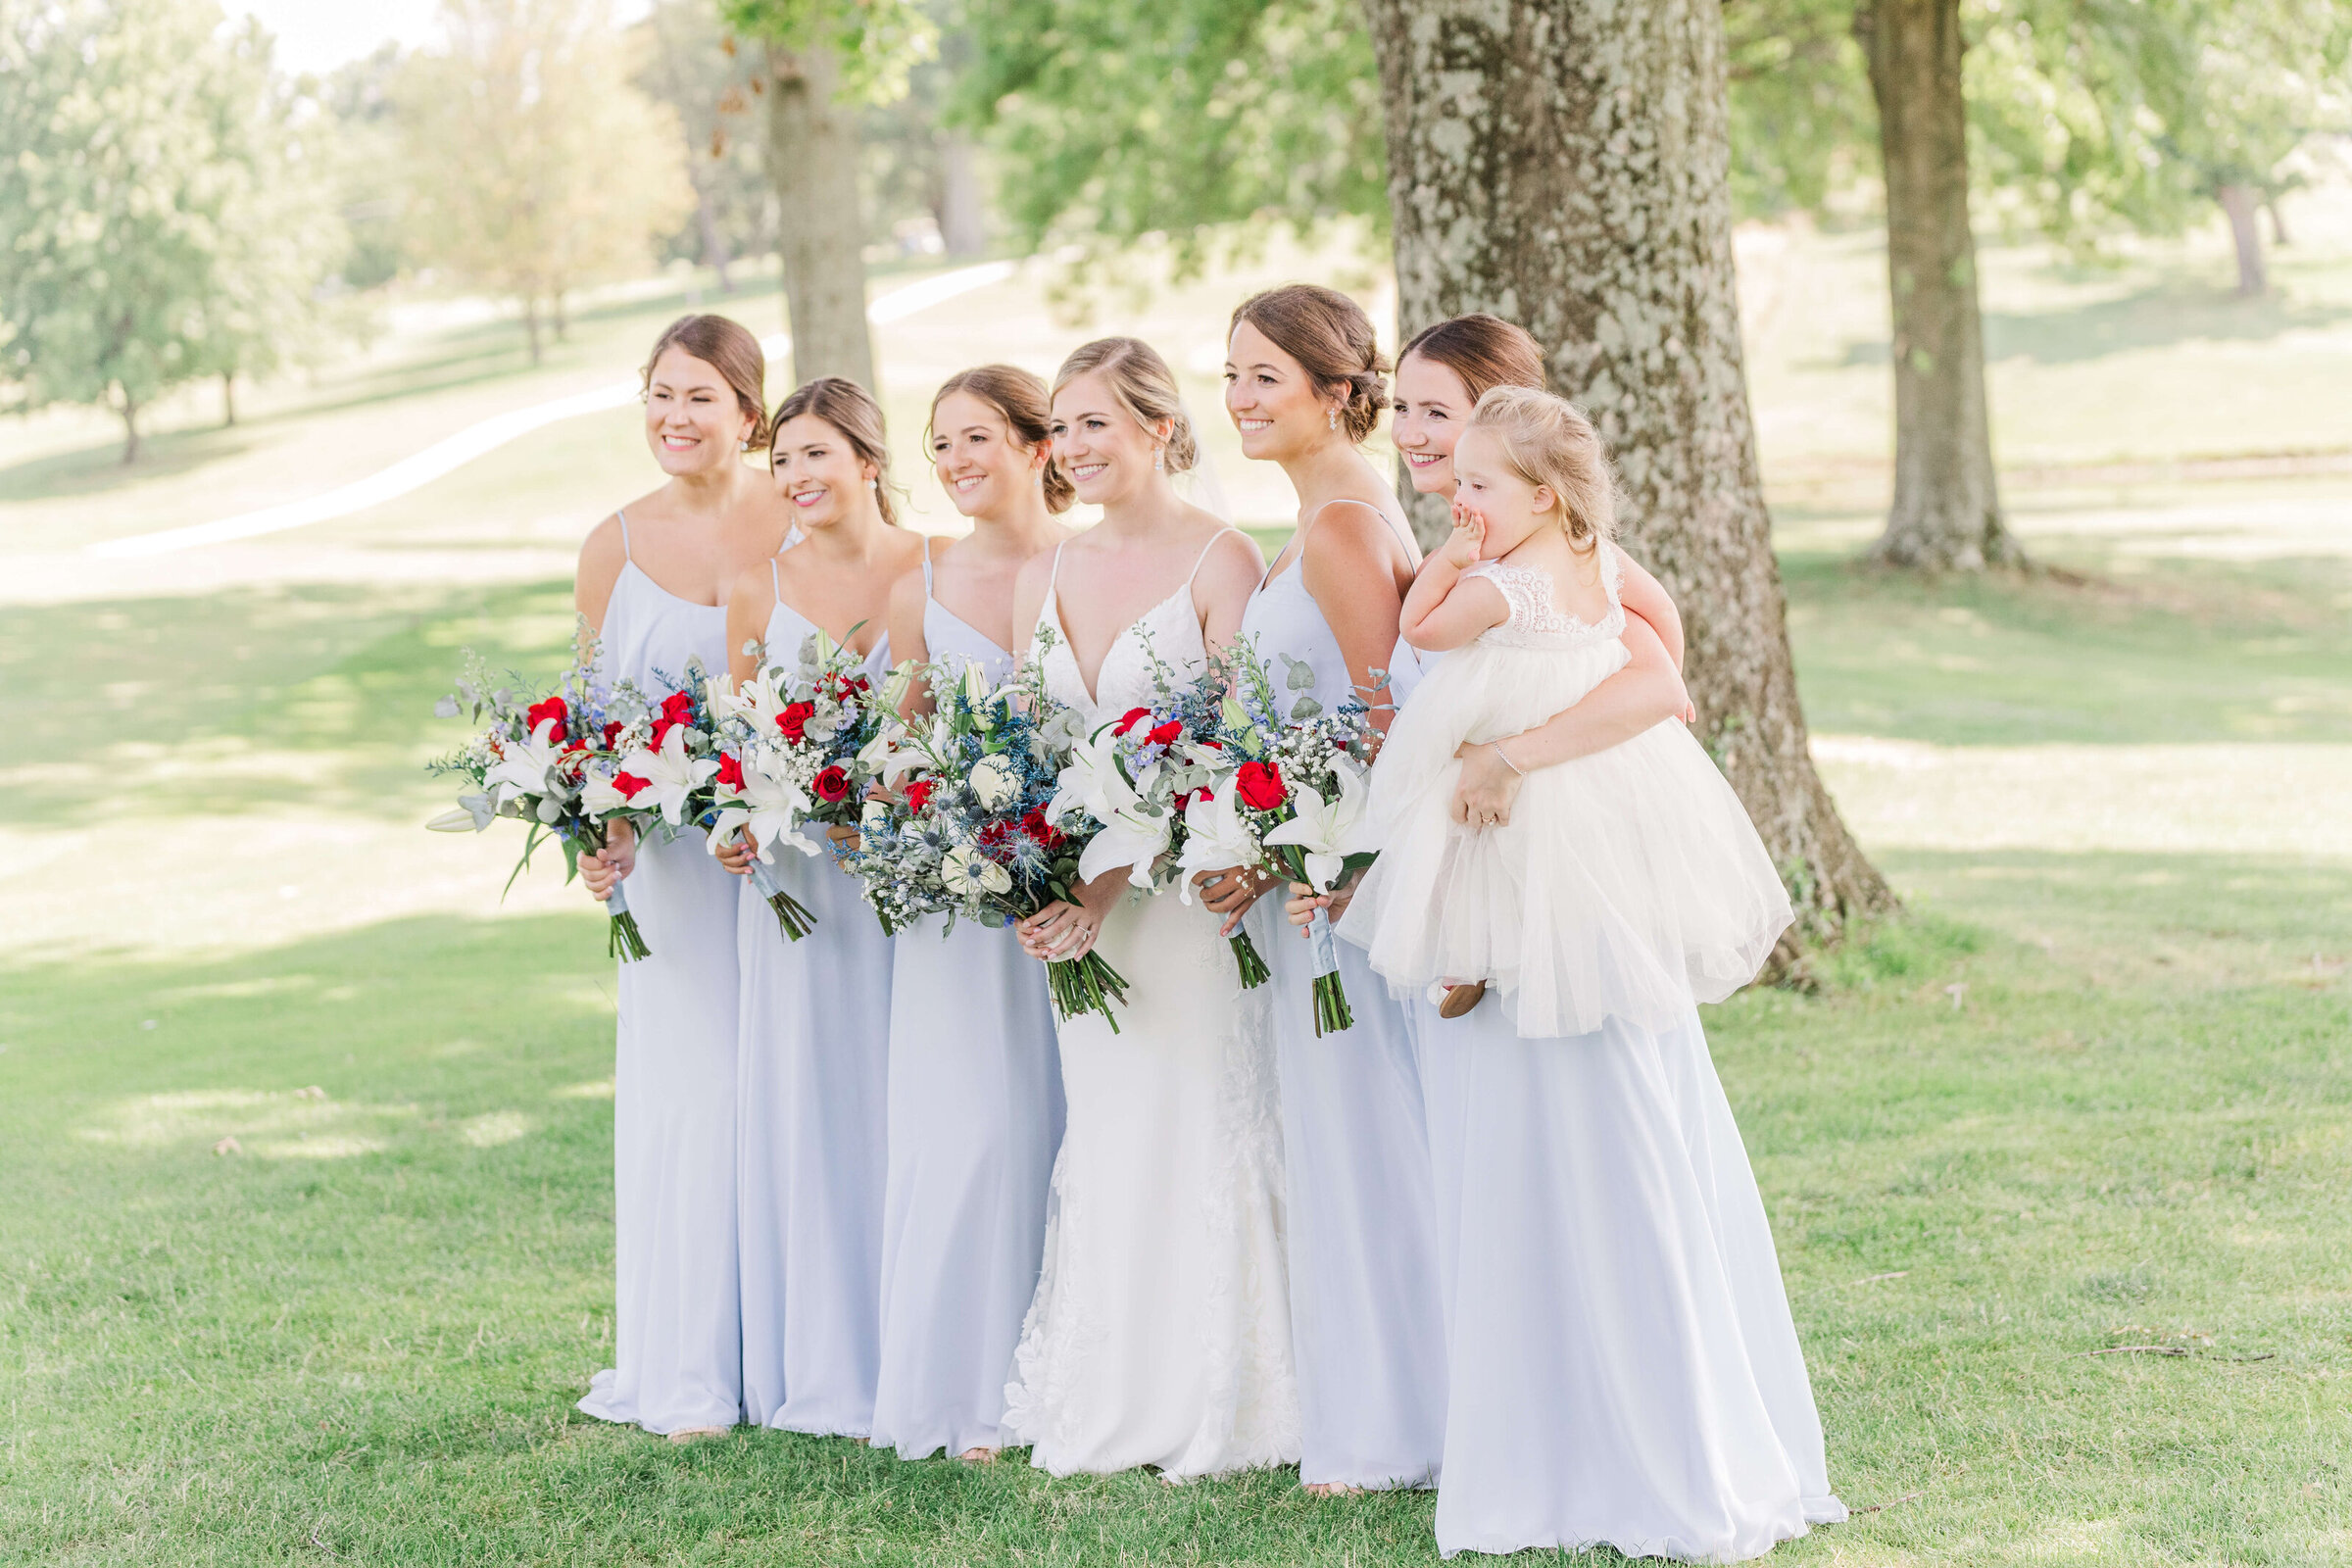 A bride and bridesmaids stand under a tree smiling at the camera. They are wearing light blue and the bride is holding a red and white bouquet.